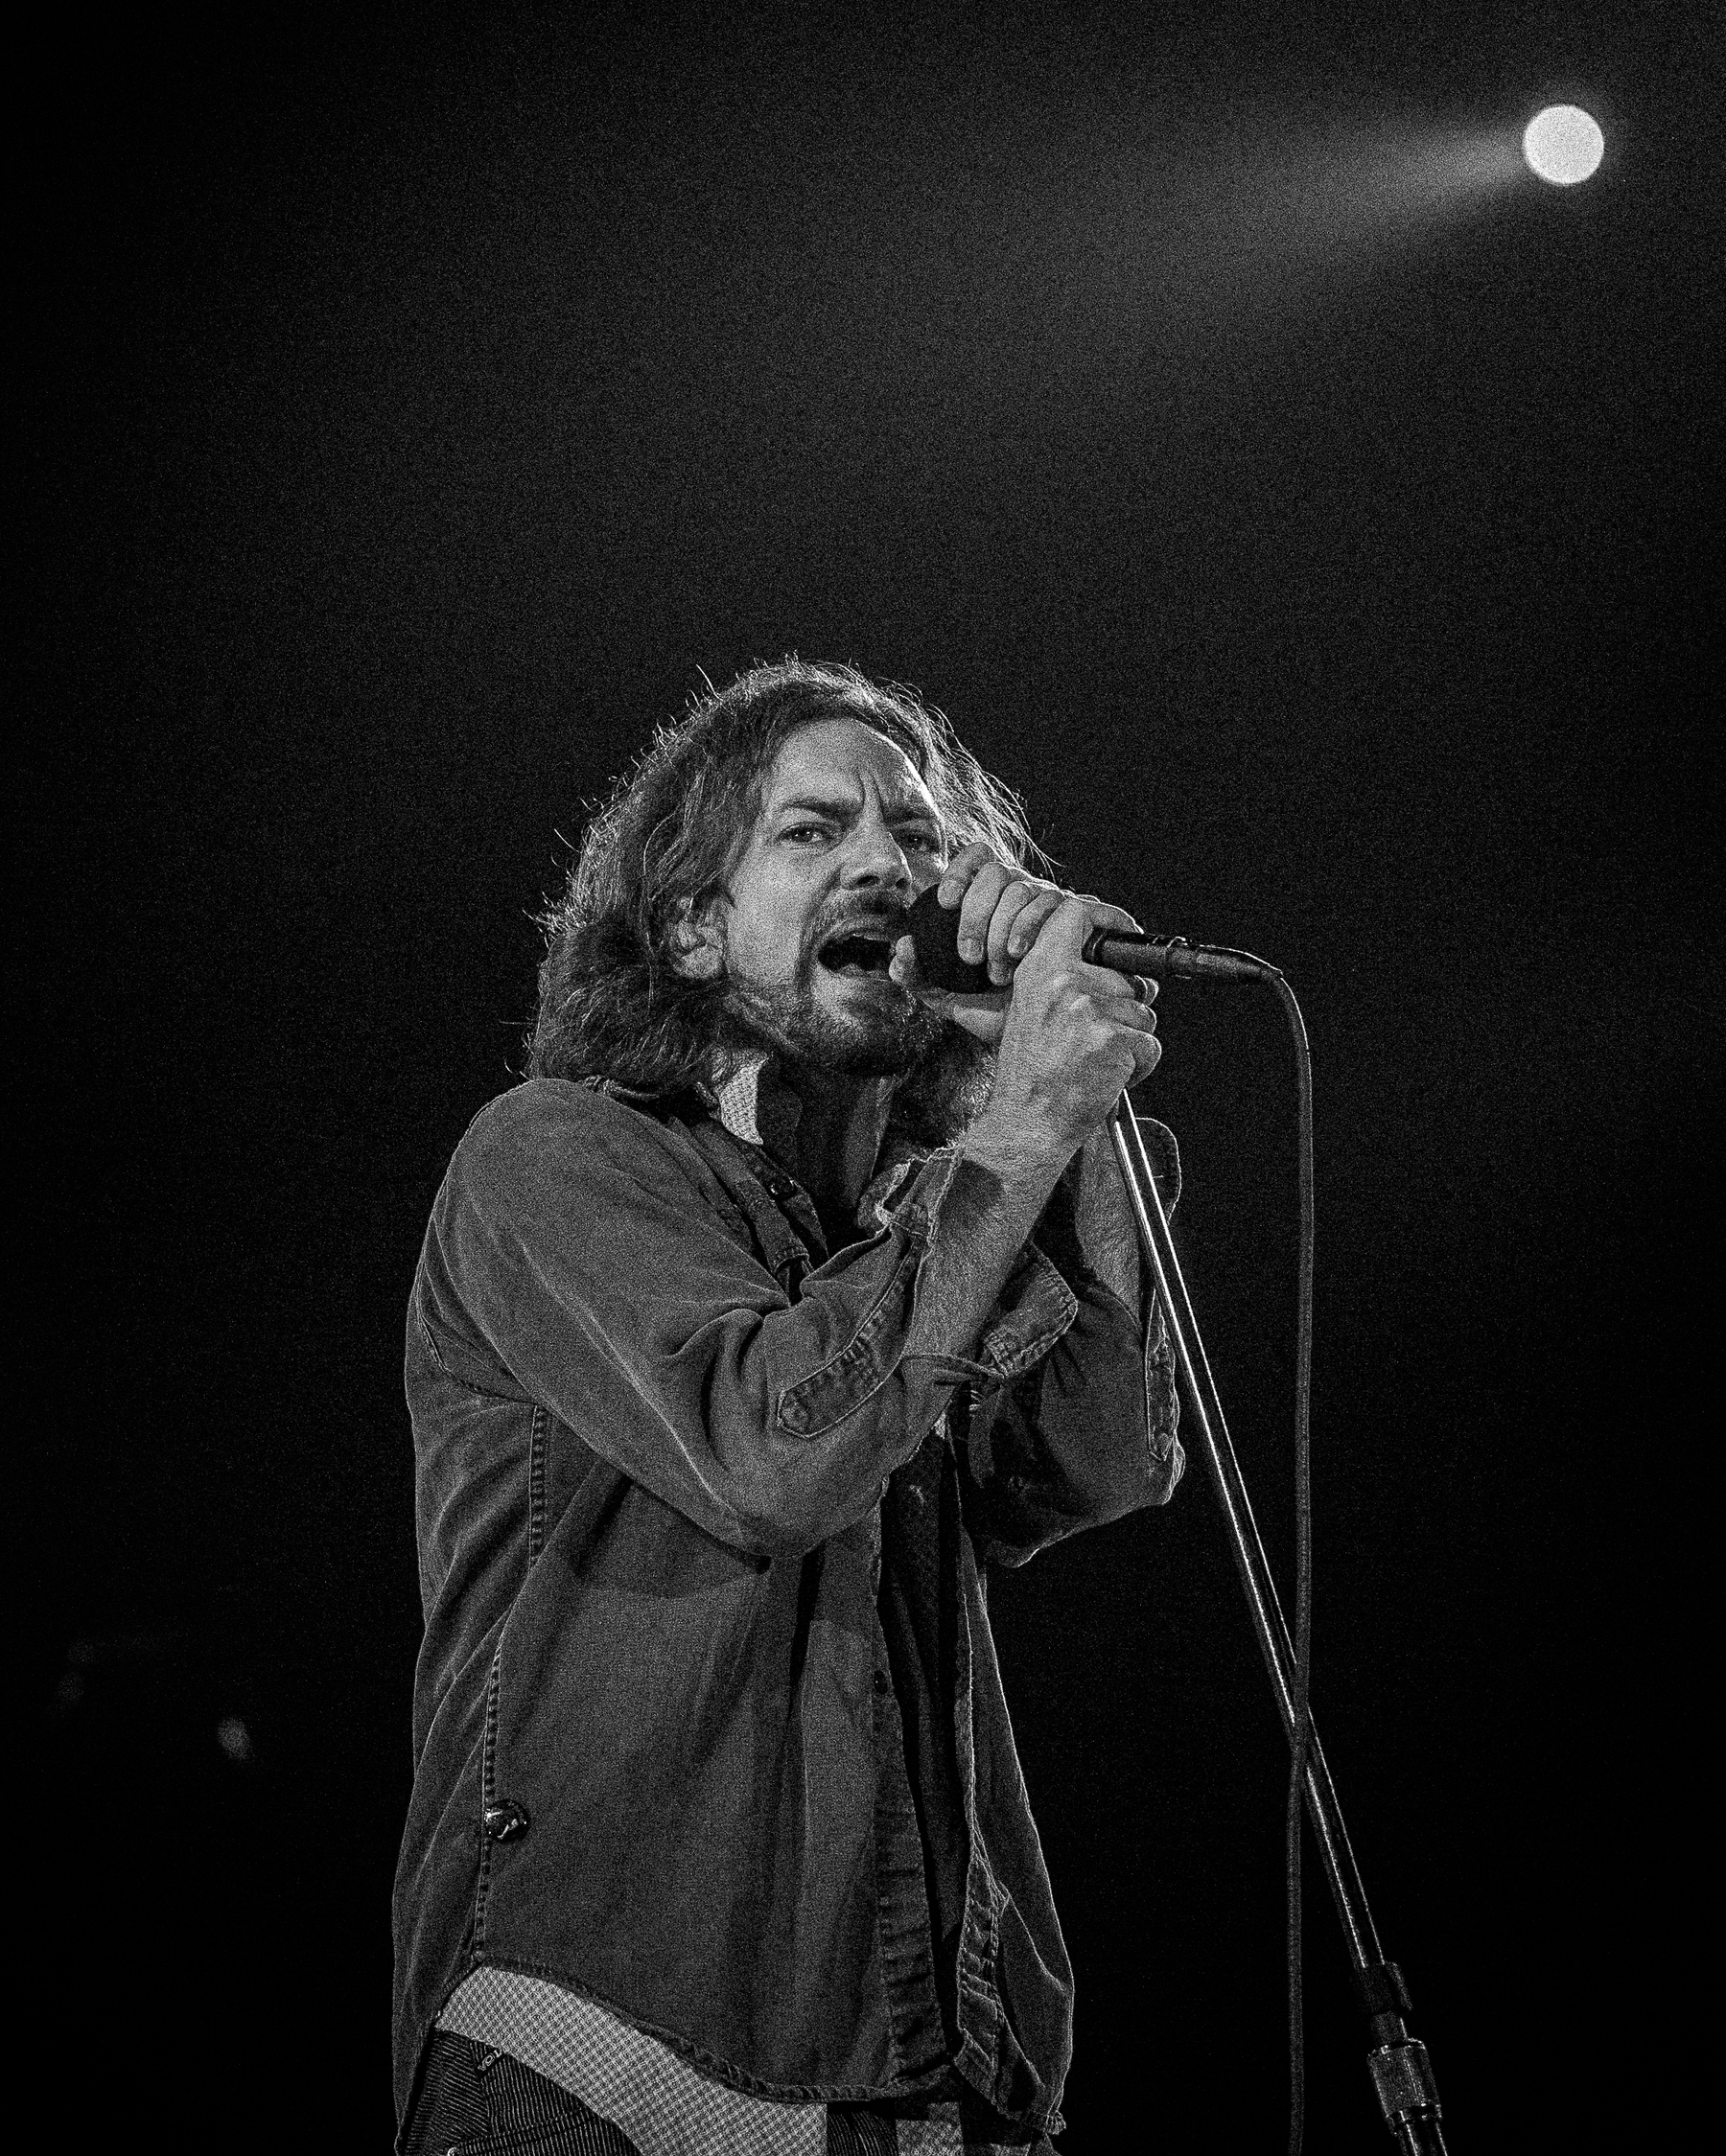 Eddie Vedder from Pearl Jam singing into a microphone on a stage, staring into the lens.